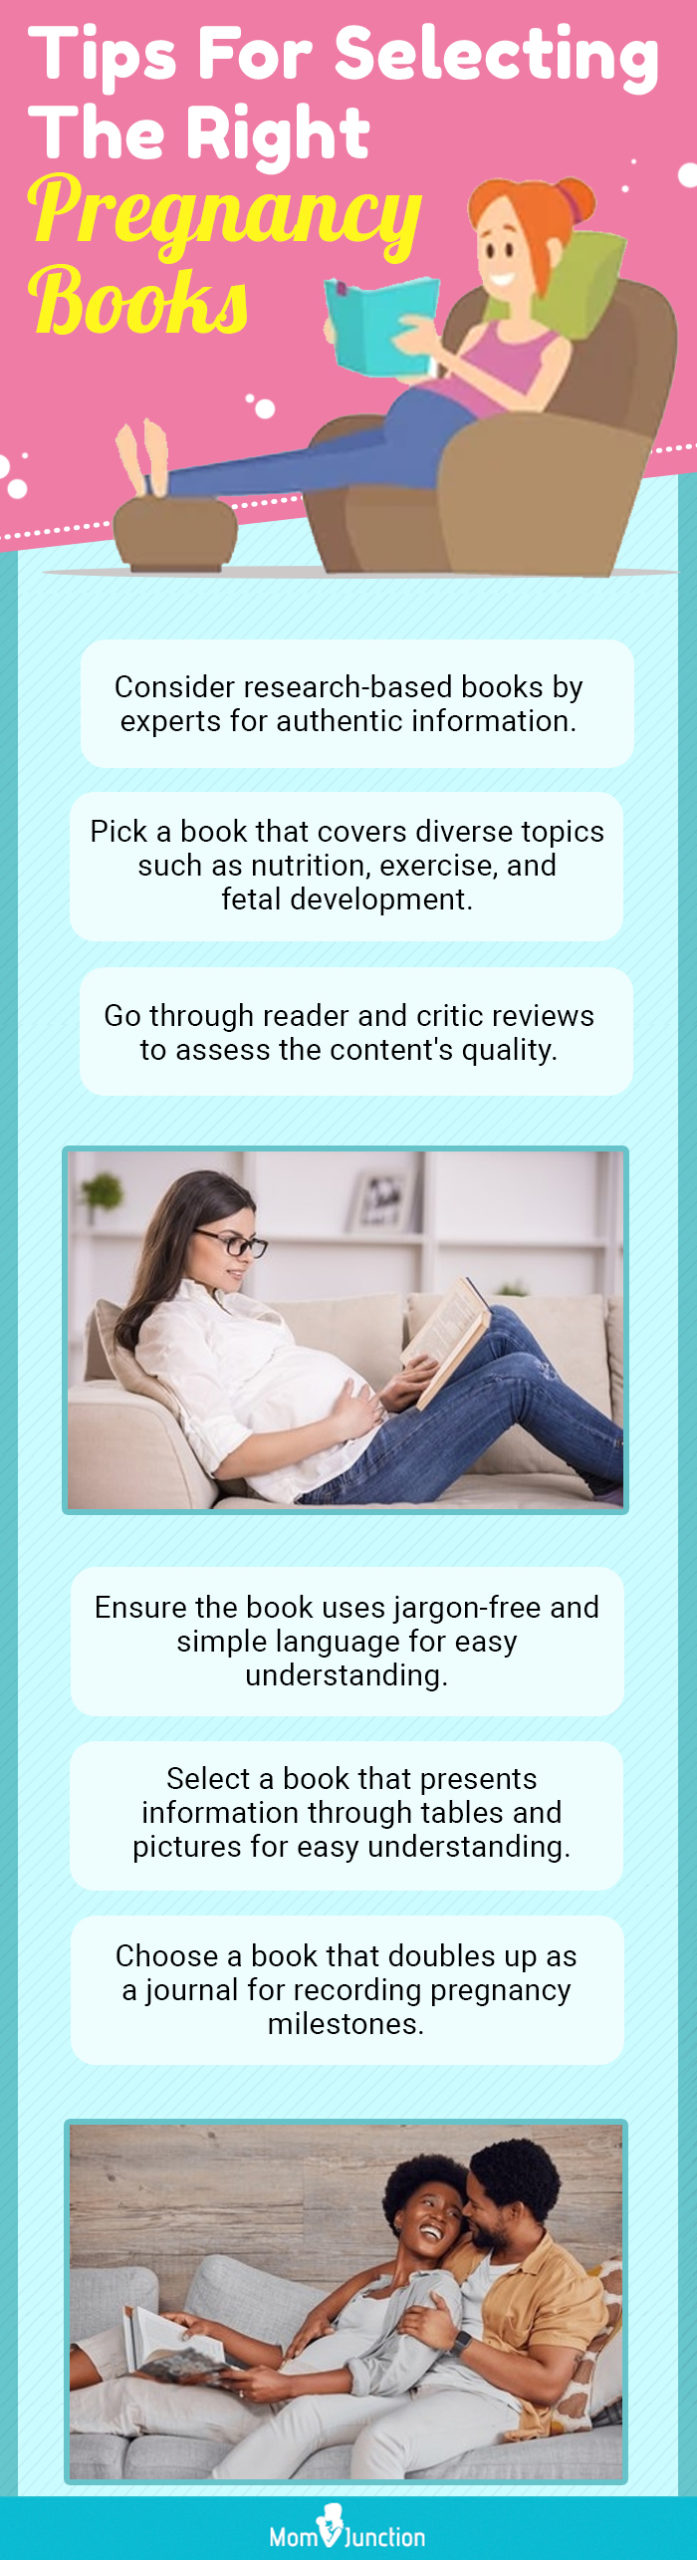 Tips For Selecting The Right Pregnancy Books (infographic)